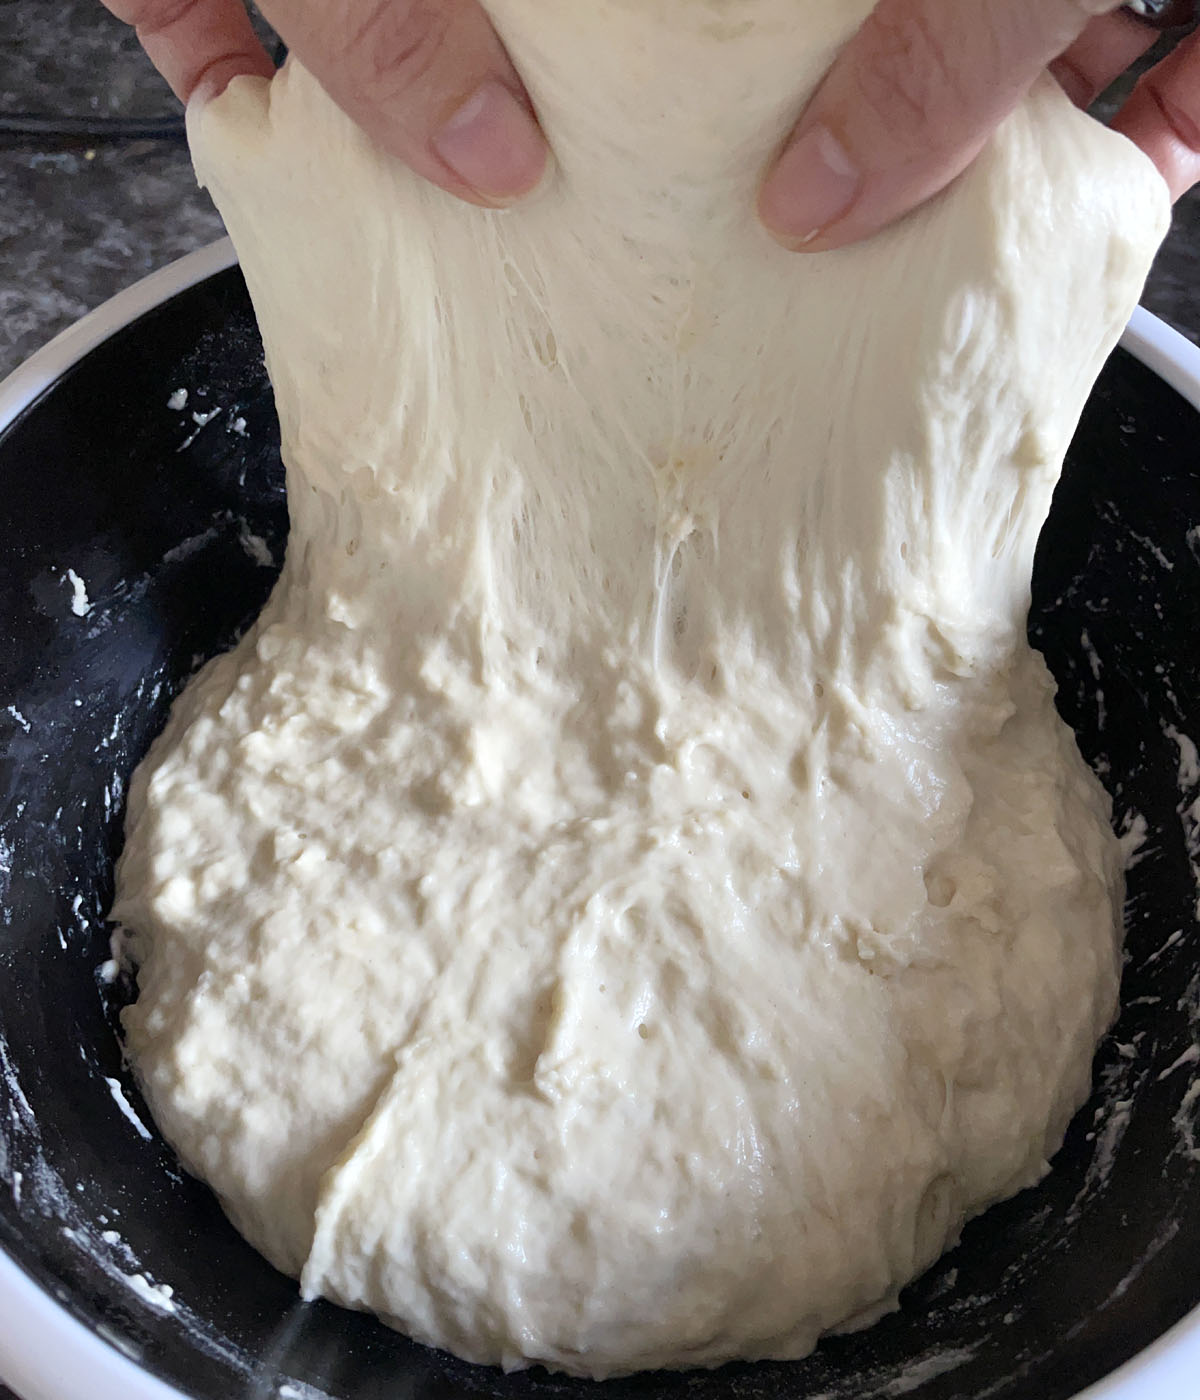 Two hands stretching dough upwards in a bowl.